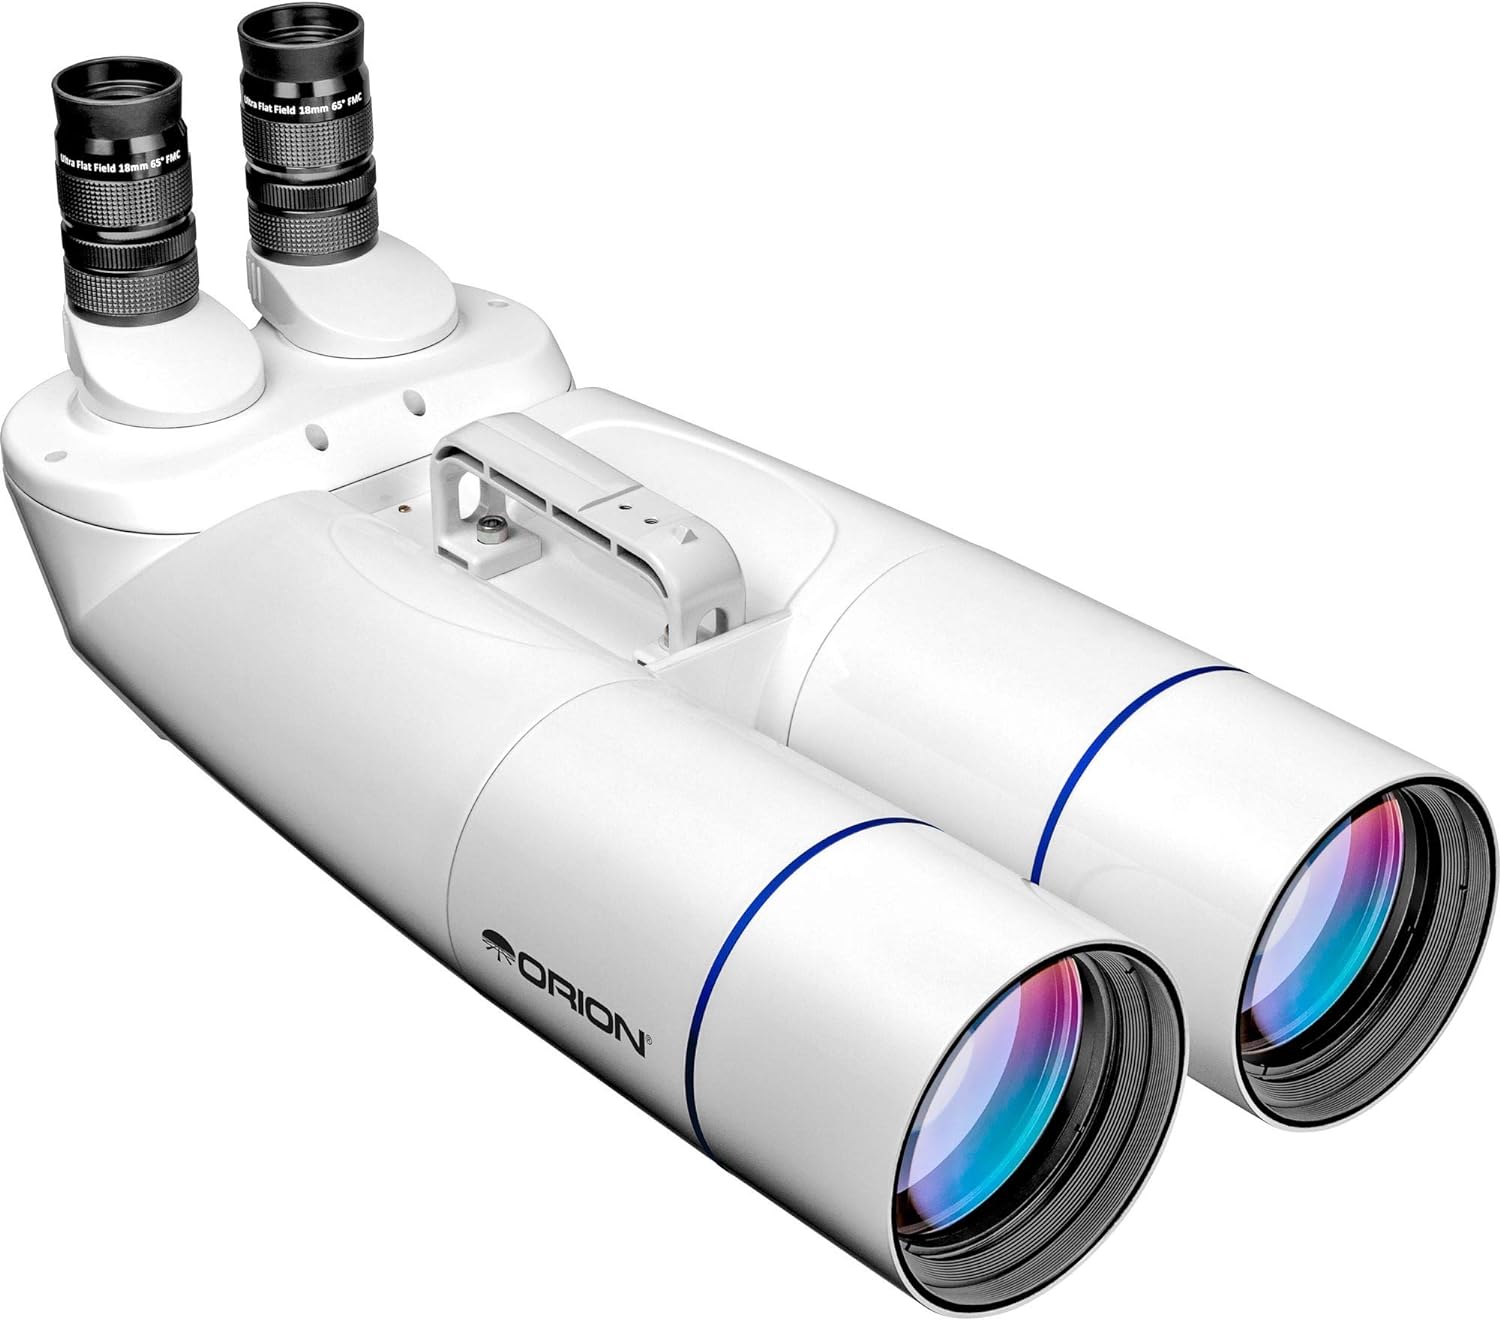 Orion GiantView BT-100 ED 90-Degree Binocular Telescope for Advanced Astronomers - Stargazing with Two Eyes Provides an Amazing Immersive Experience